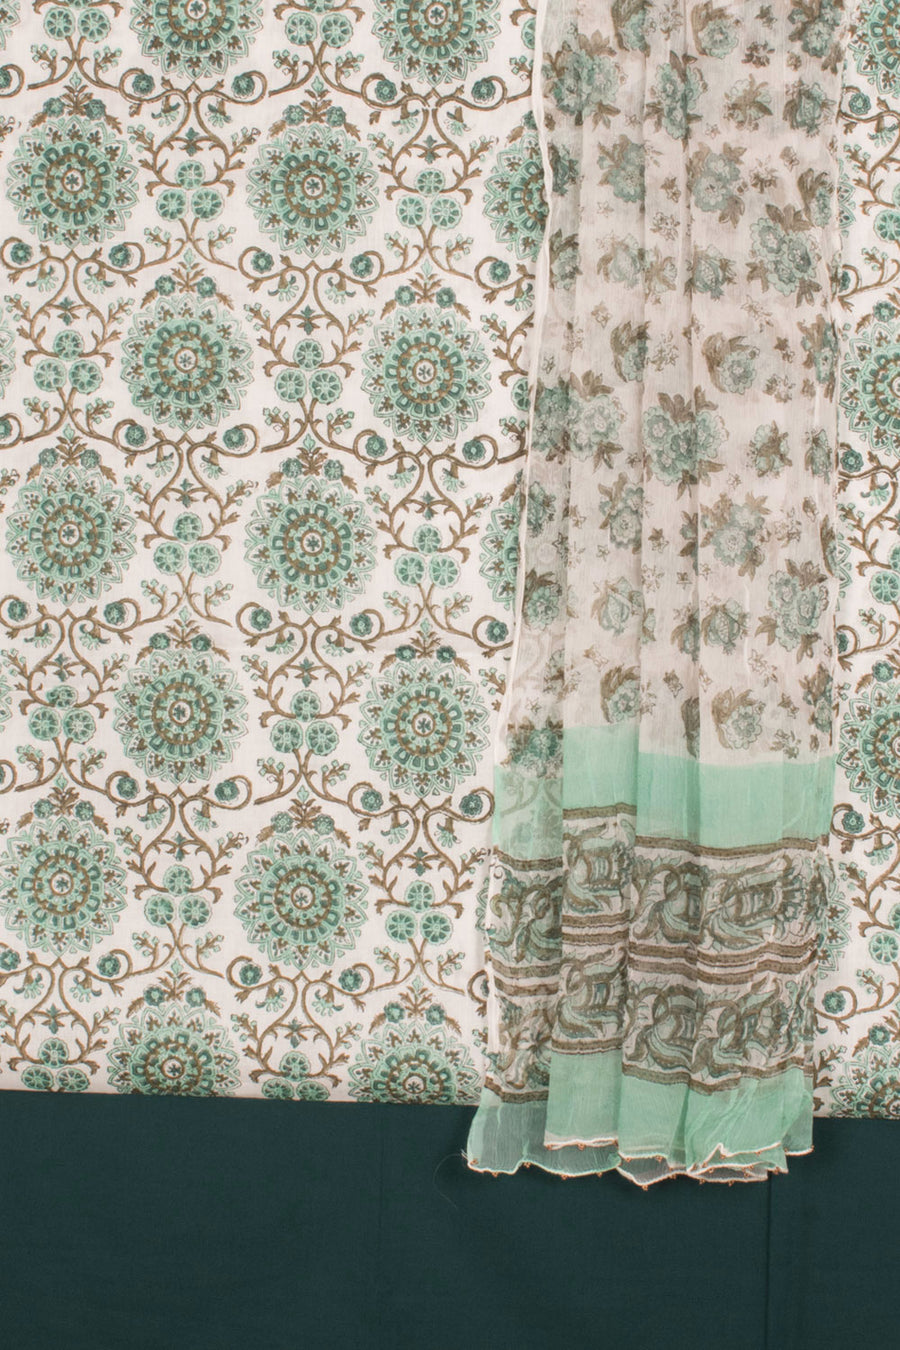 Hand Block Printed Cotton 3-Piece Salwar Suit Material with Mulmul Bottom and Chiffon Dupatta